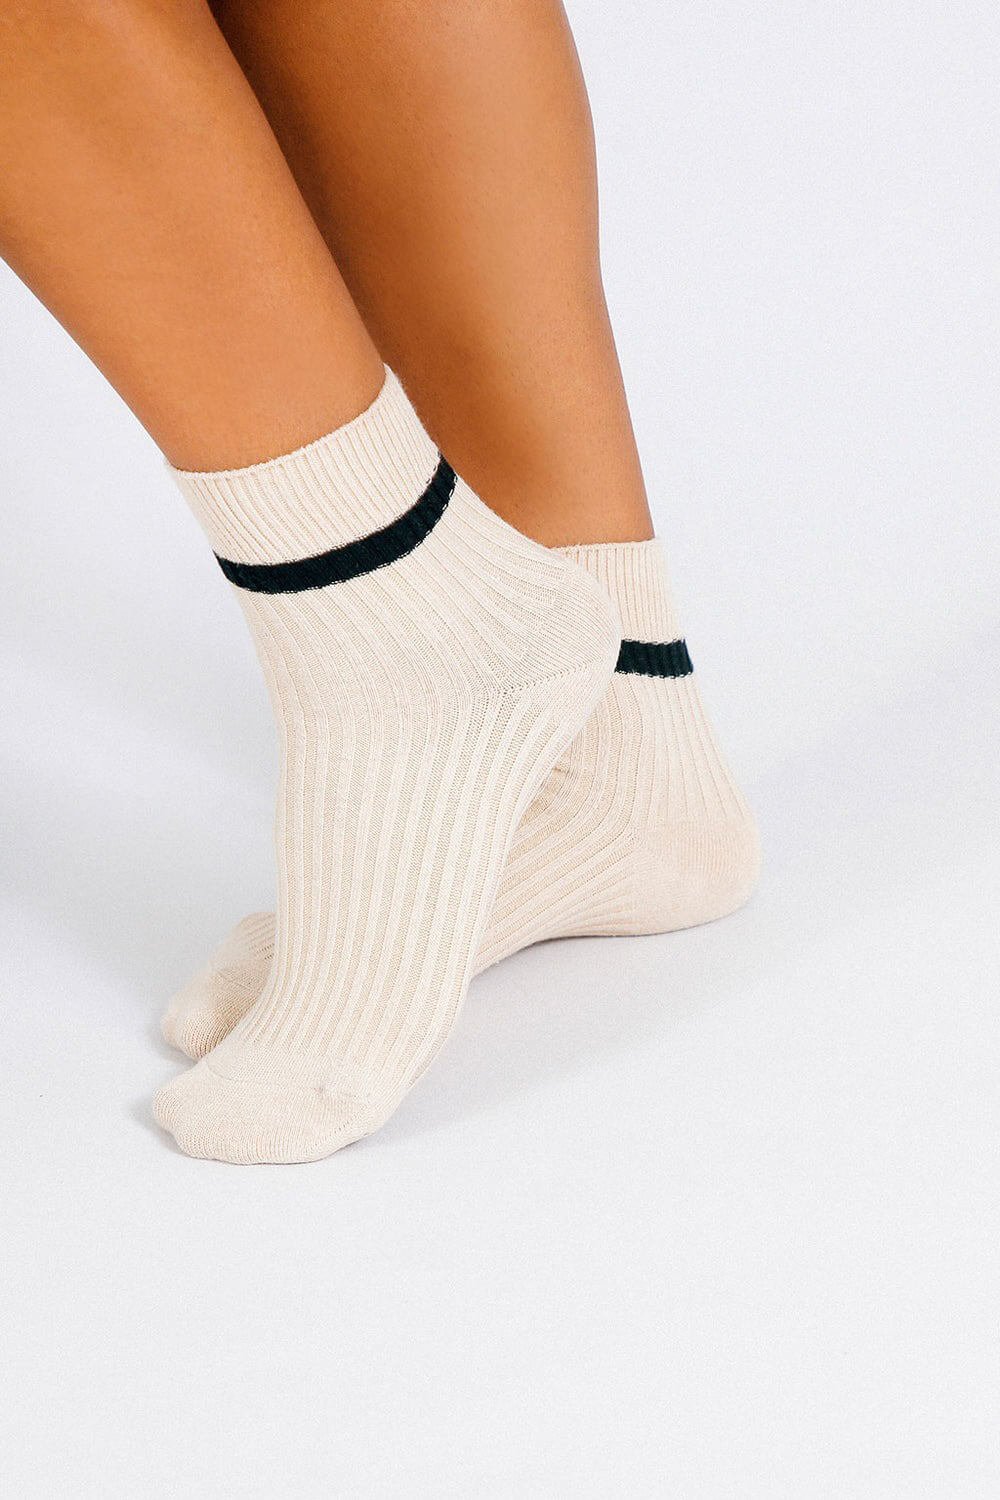 tailored union andy ankle sock off white